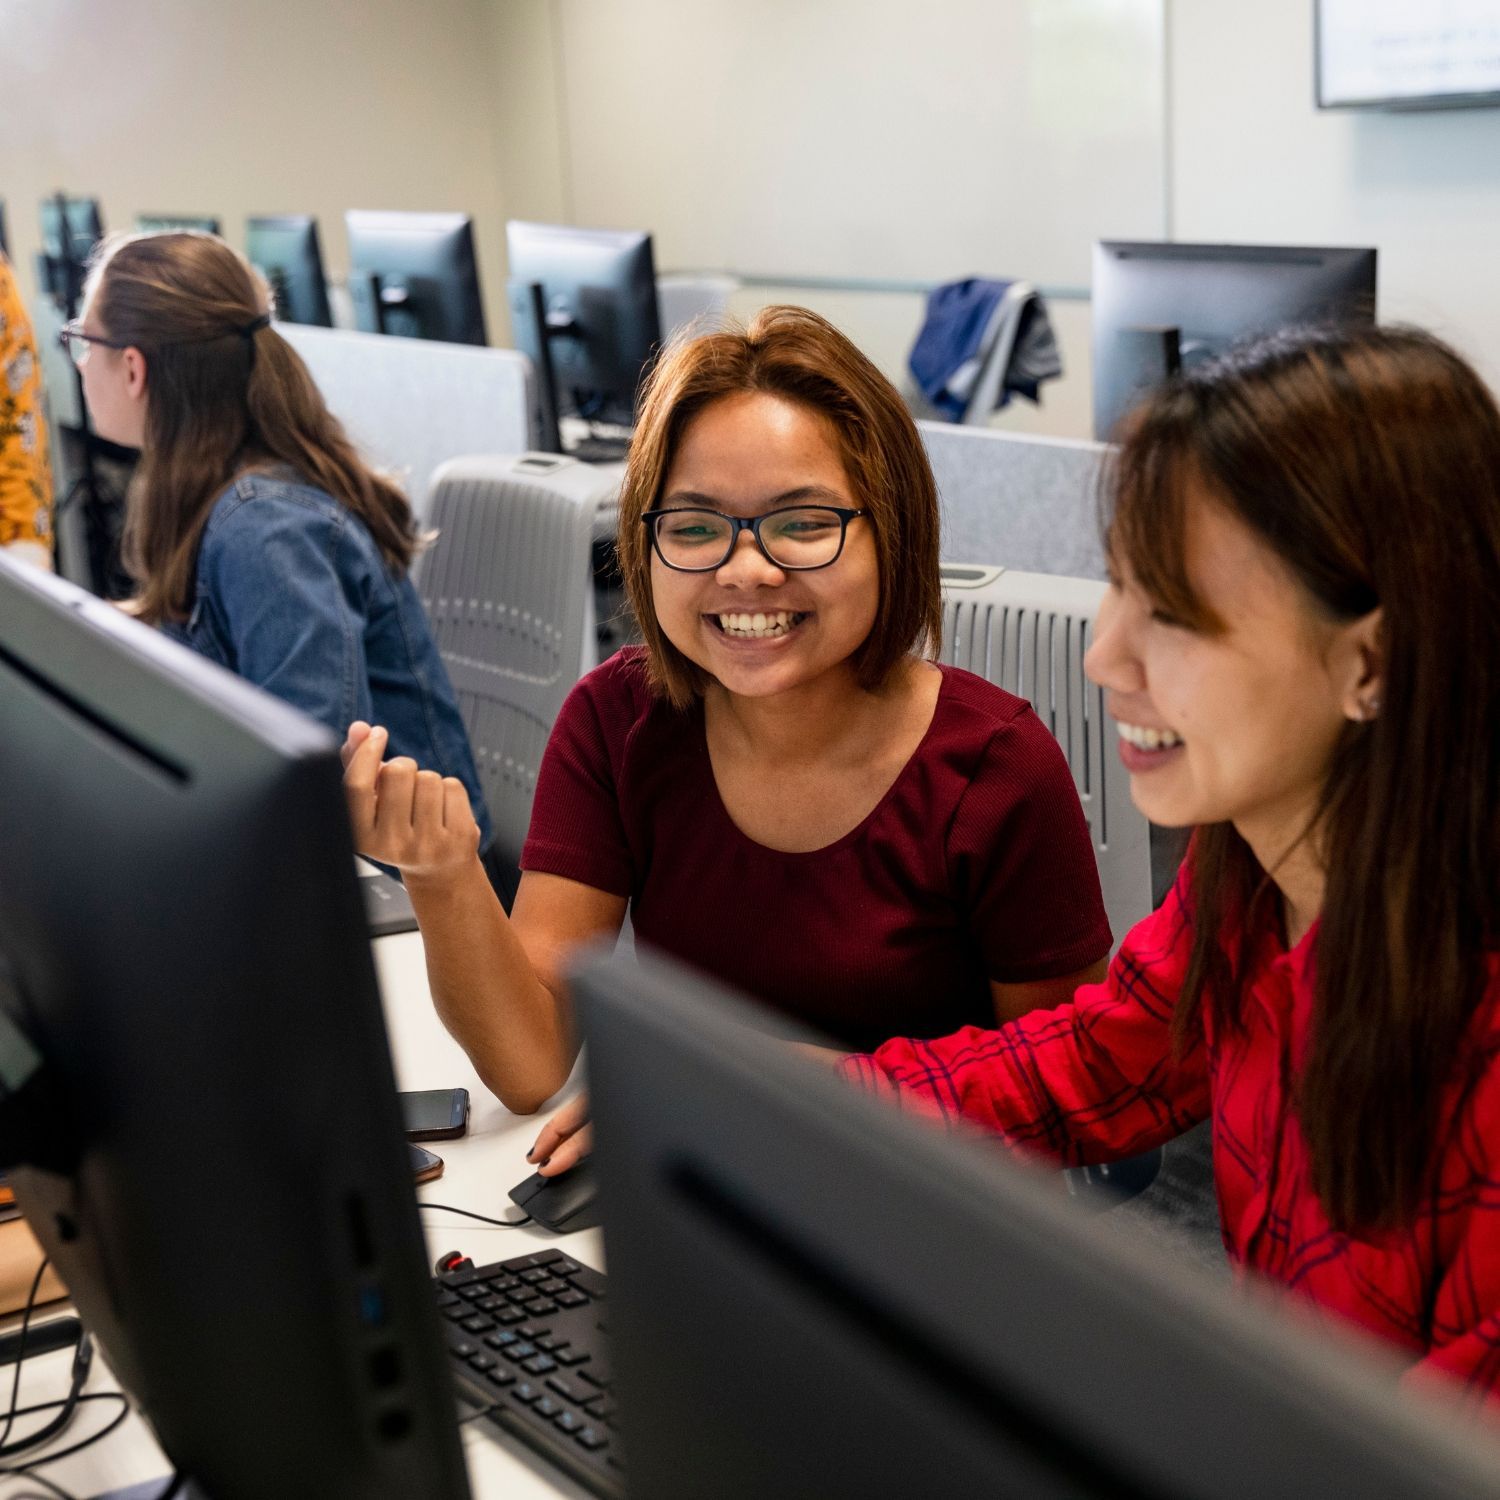 Two women smiling, browsing a computer